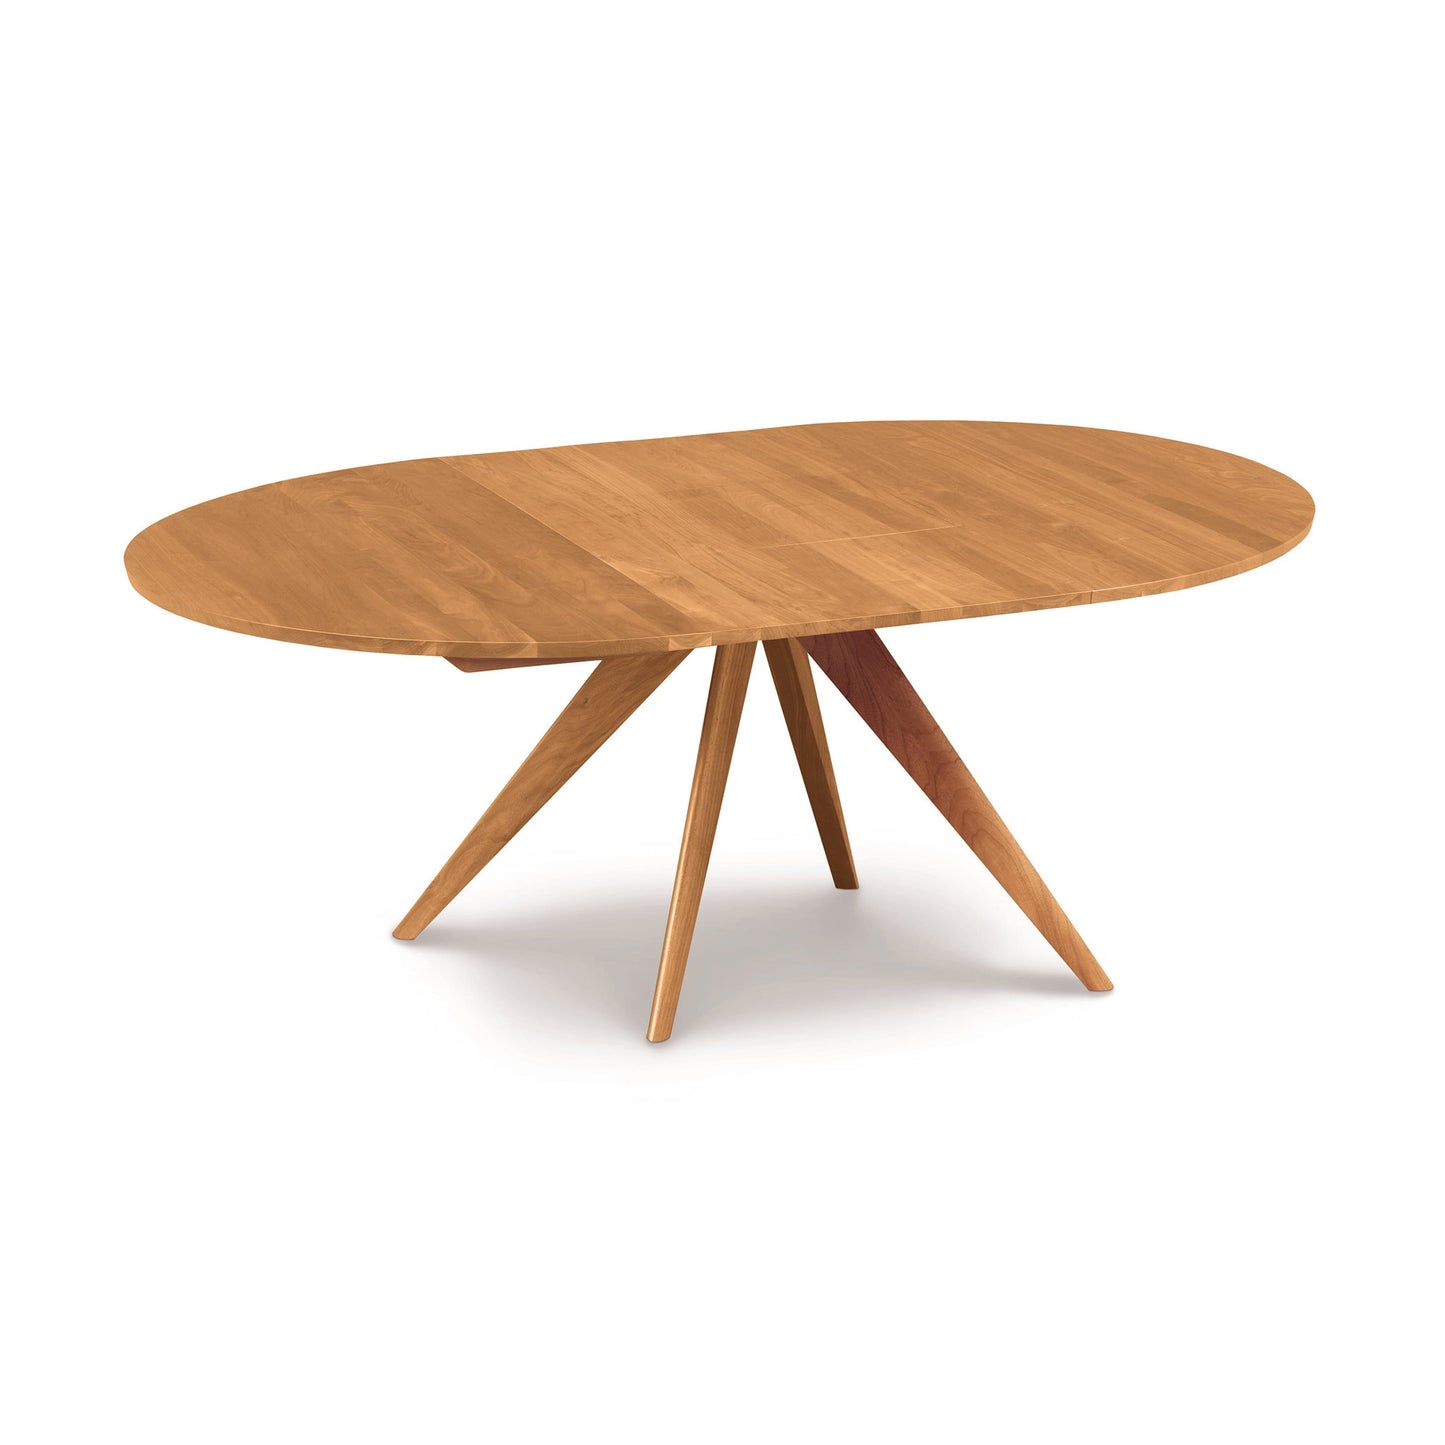 A wooden oval table with three legs on a white background.